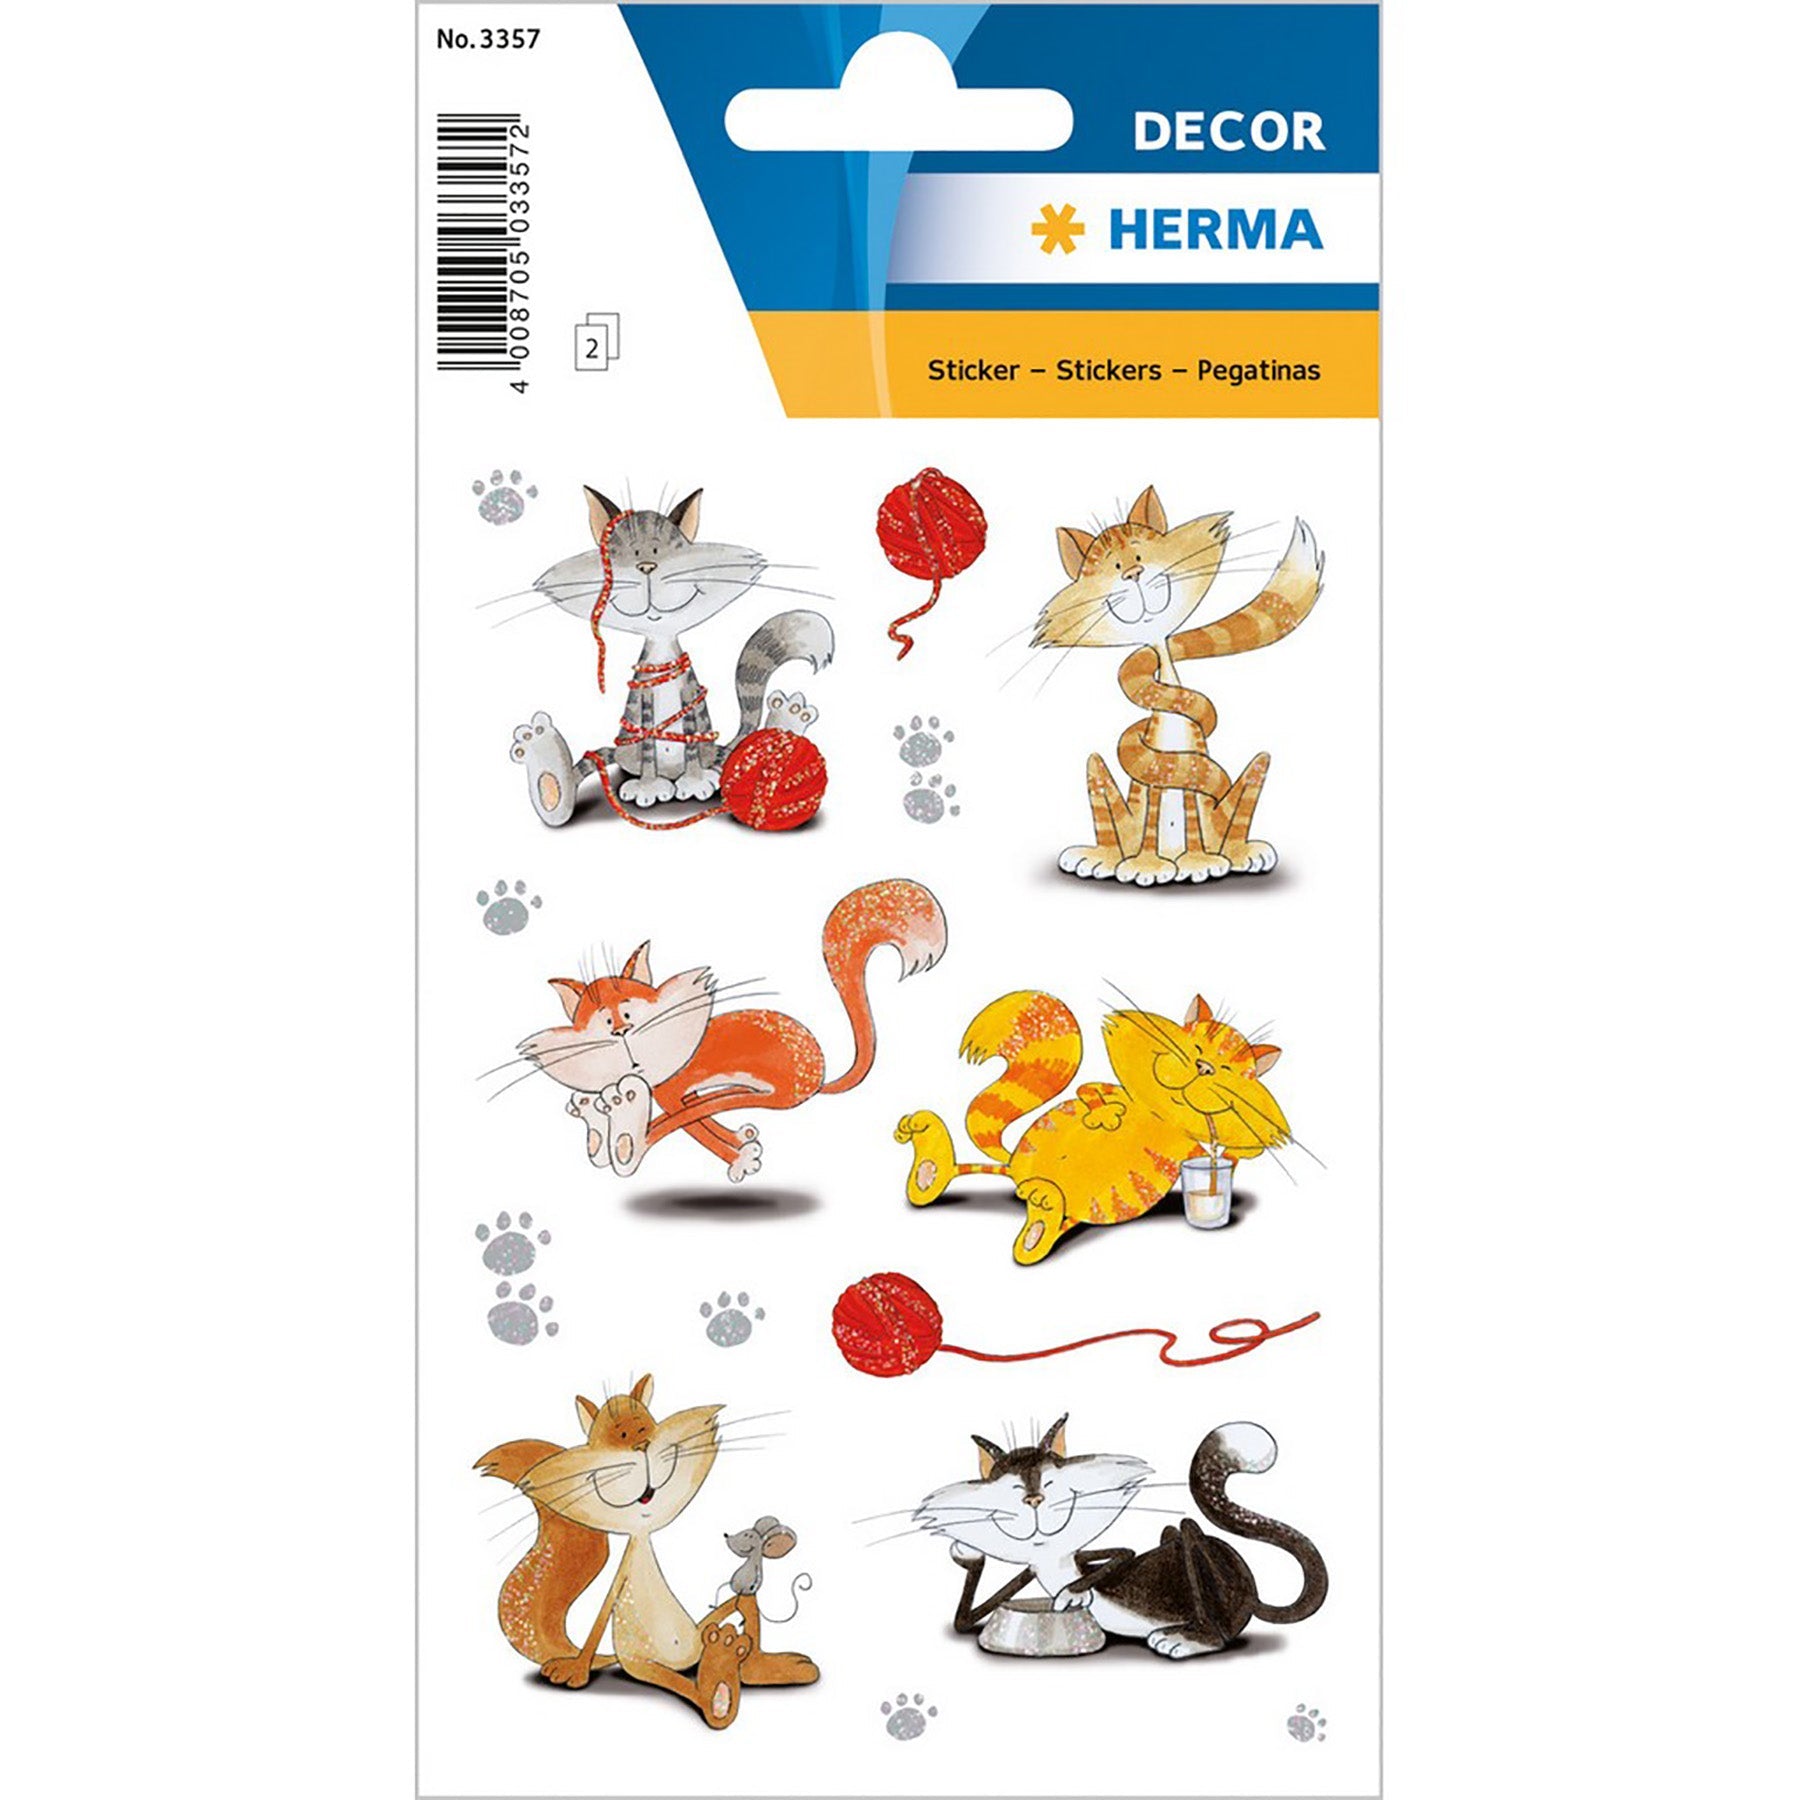 Herma Decor 2 Sheets Stickers Funny Cats Glittery 4.75x3.1in Sheet